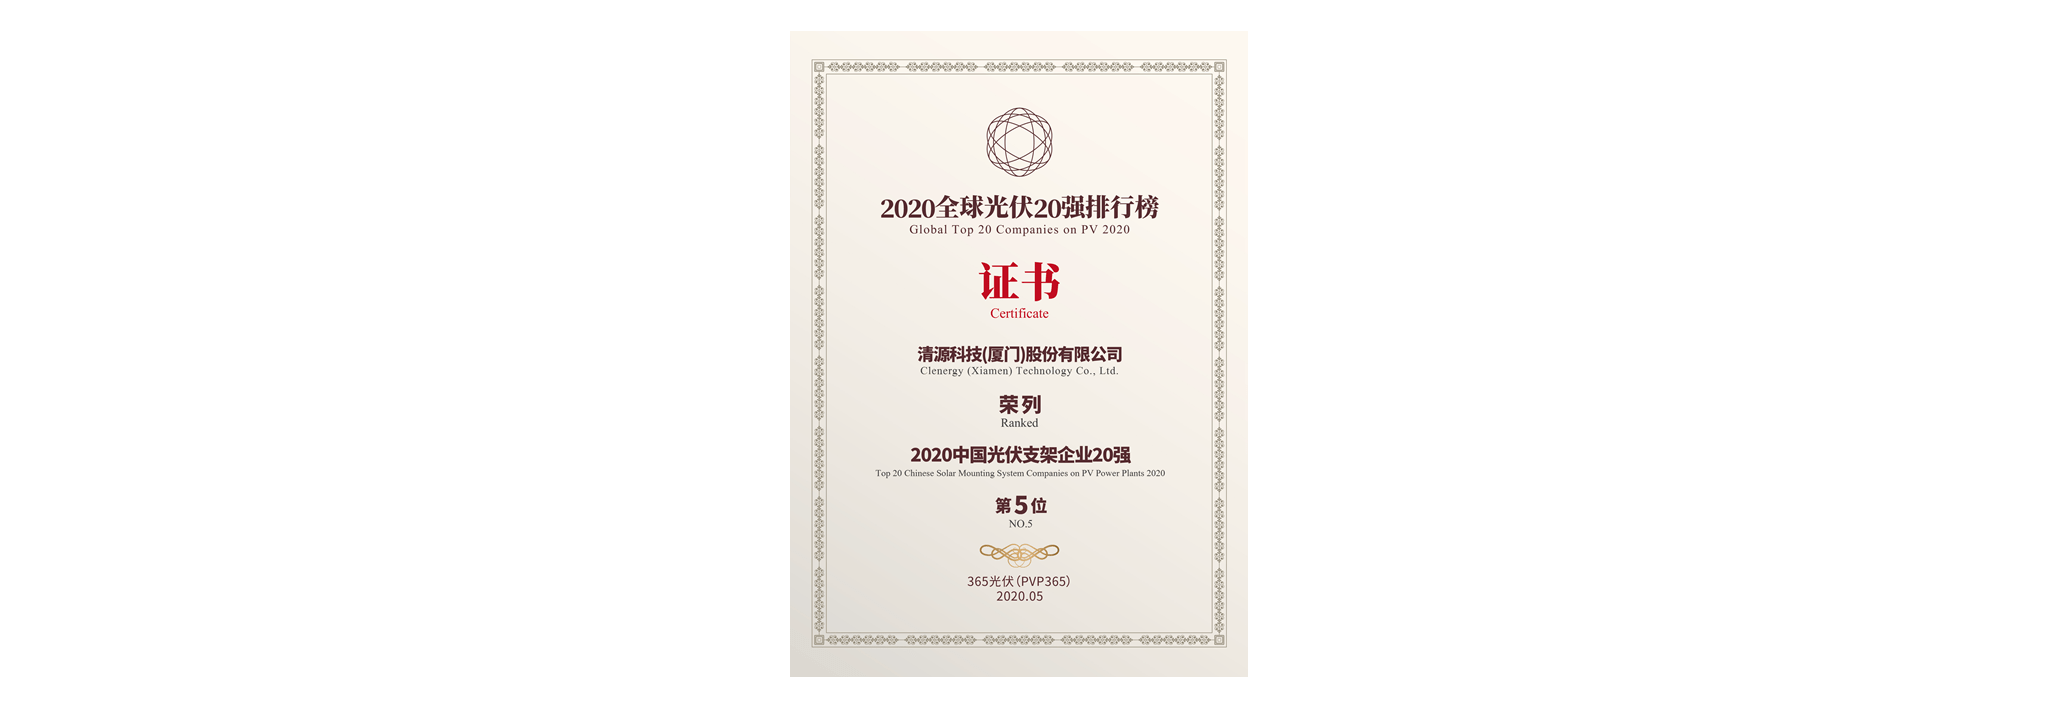 Clenergy Ranked 5th in Top Chinese Solar Mounting System Companies 2020 Certificate